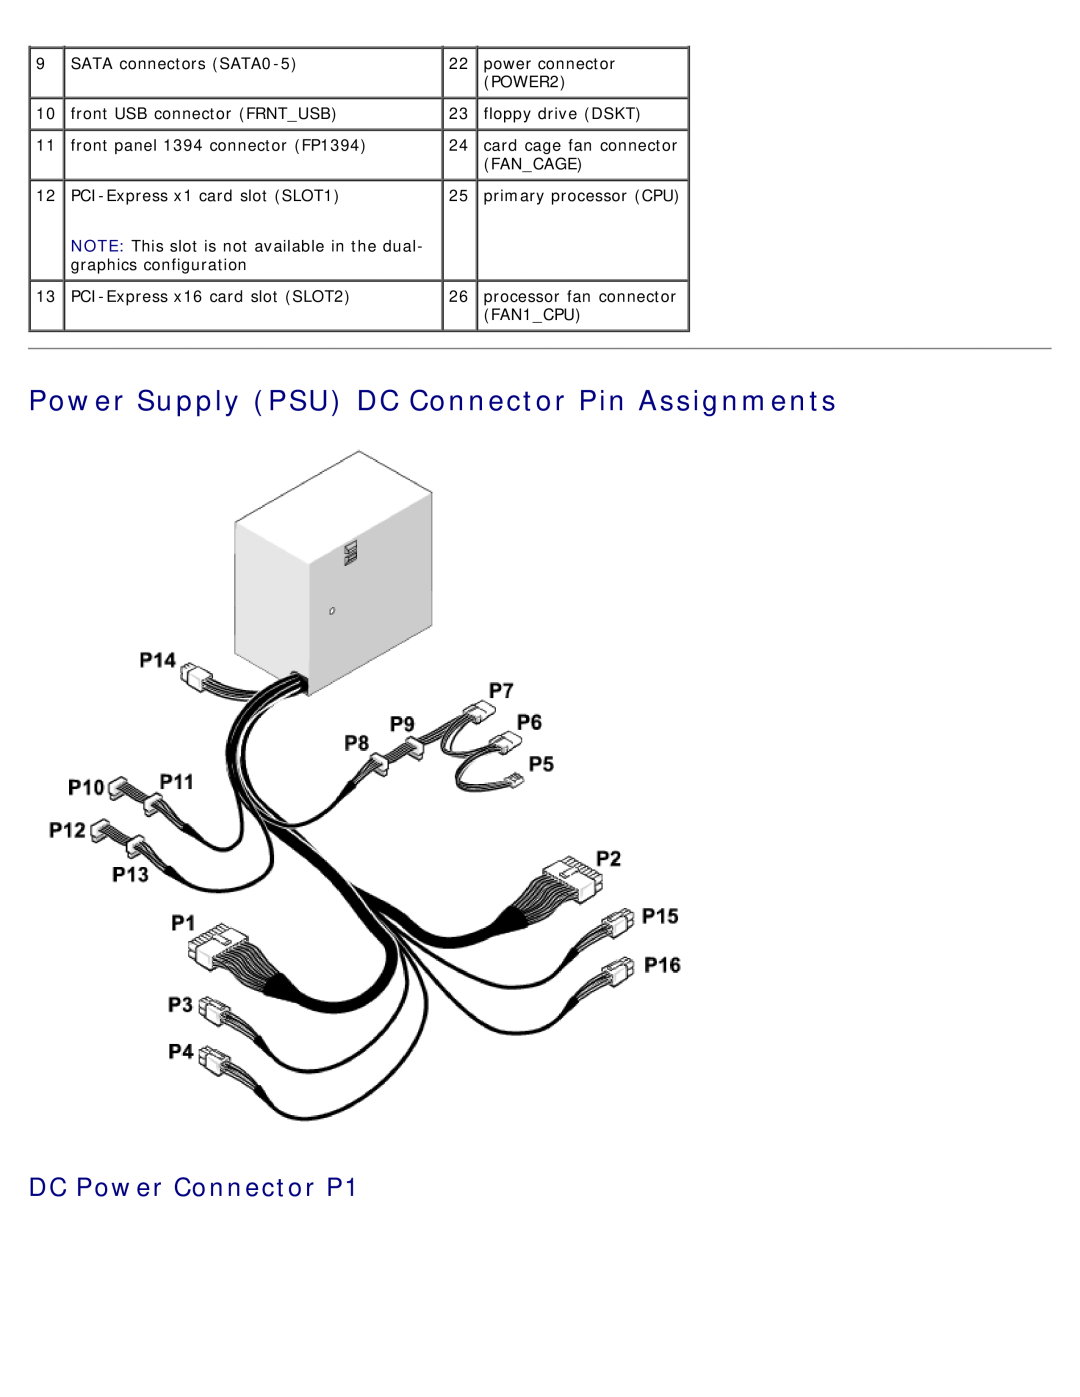 Dell DCDO, 710 H2C service manual Power Supply PSU DC Connector Pin Assignments, DC Power Connector P1 